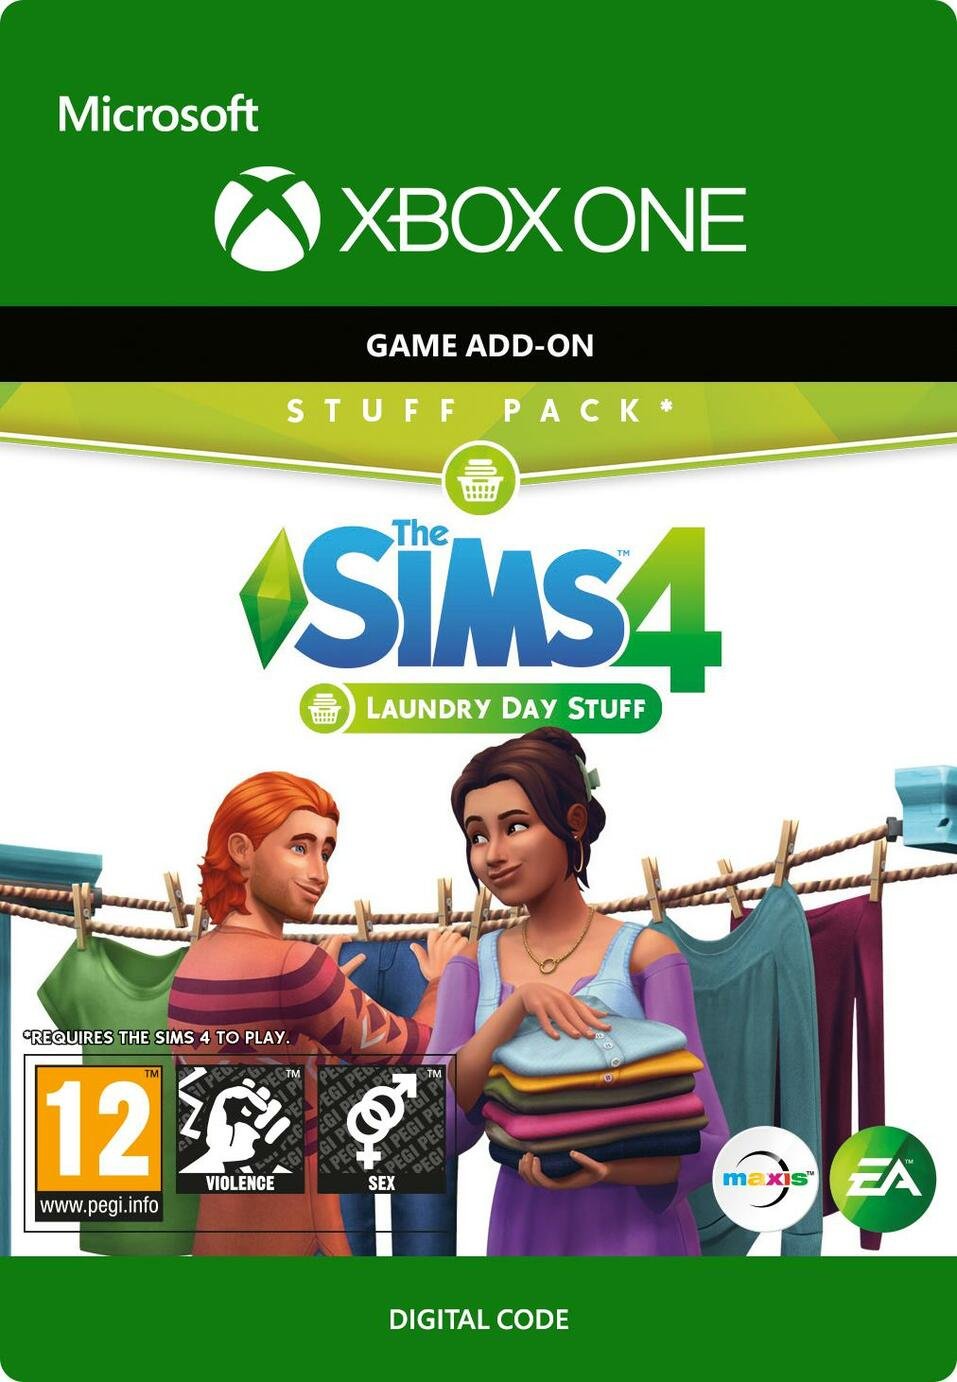 The Sims 4: Laundry Day Stuff Xbox Game - Digital Download